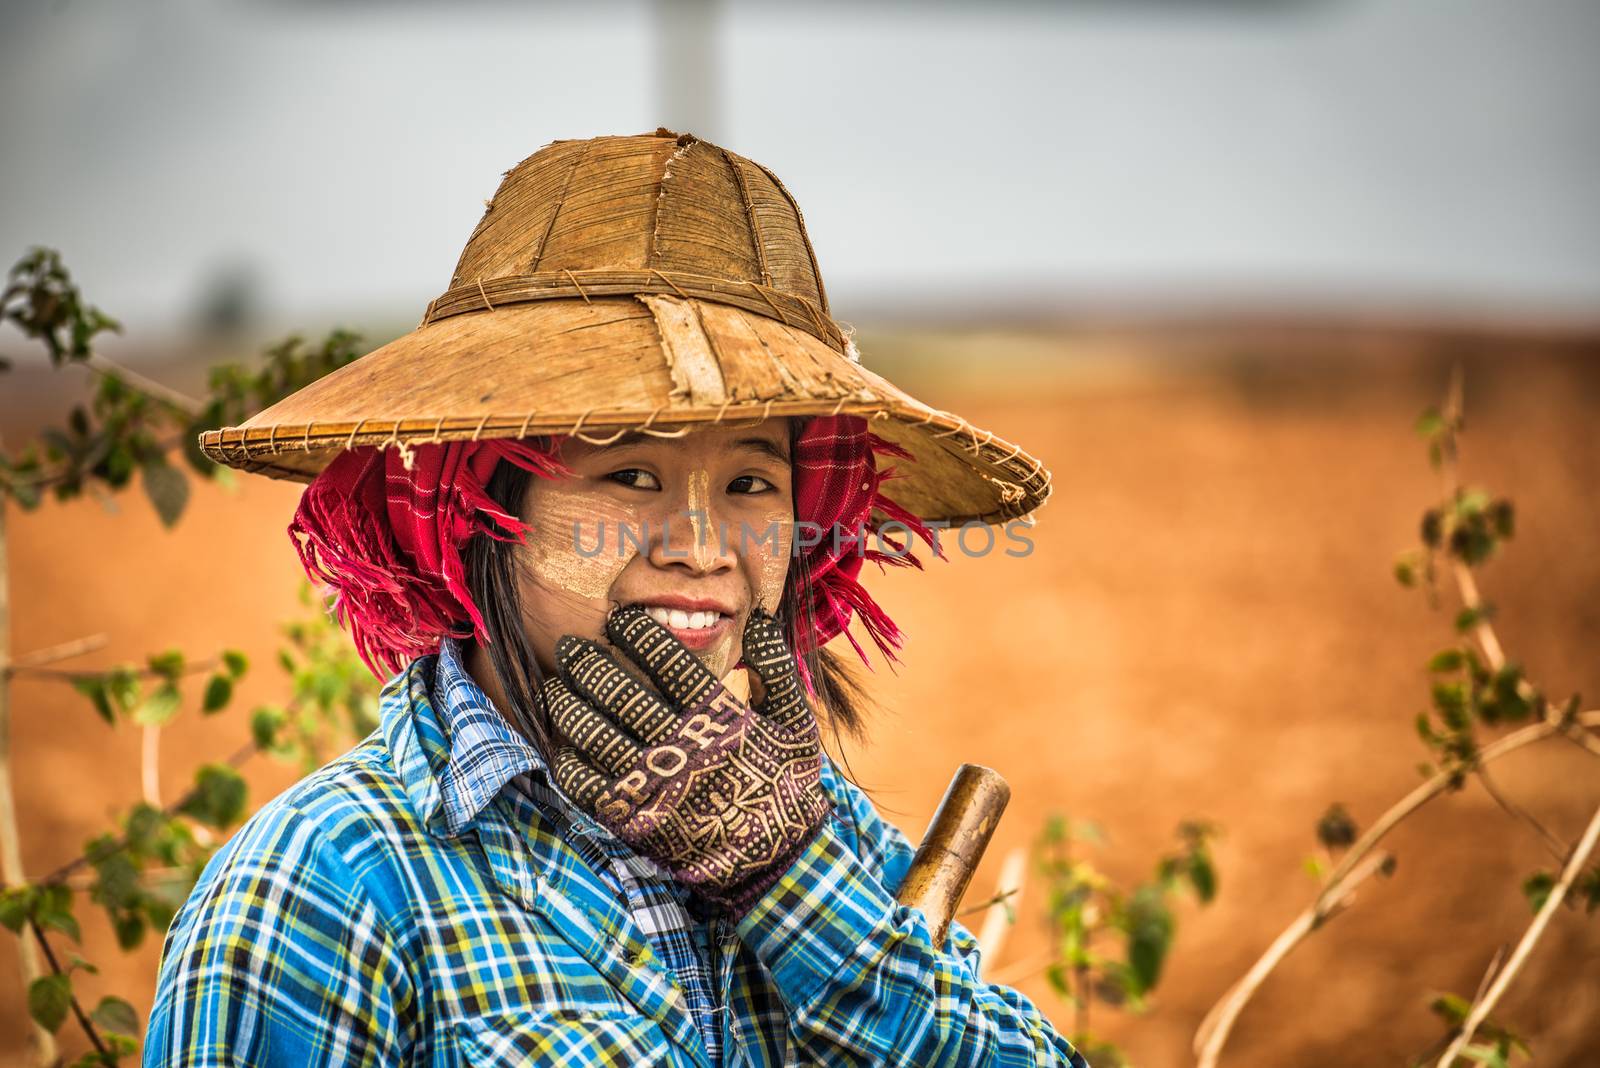 SHAN, MYANMAR - JANUARY 25, 2016 : Portrait of a young female farmer working in a field